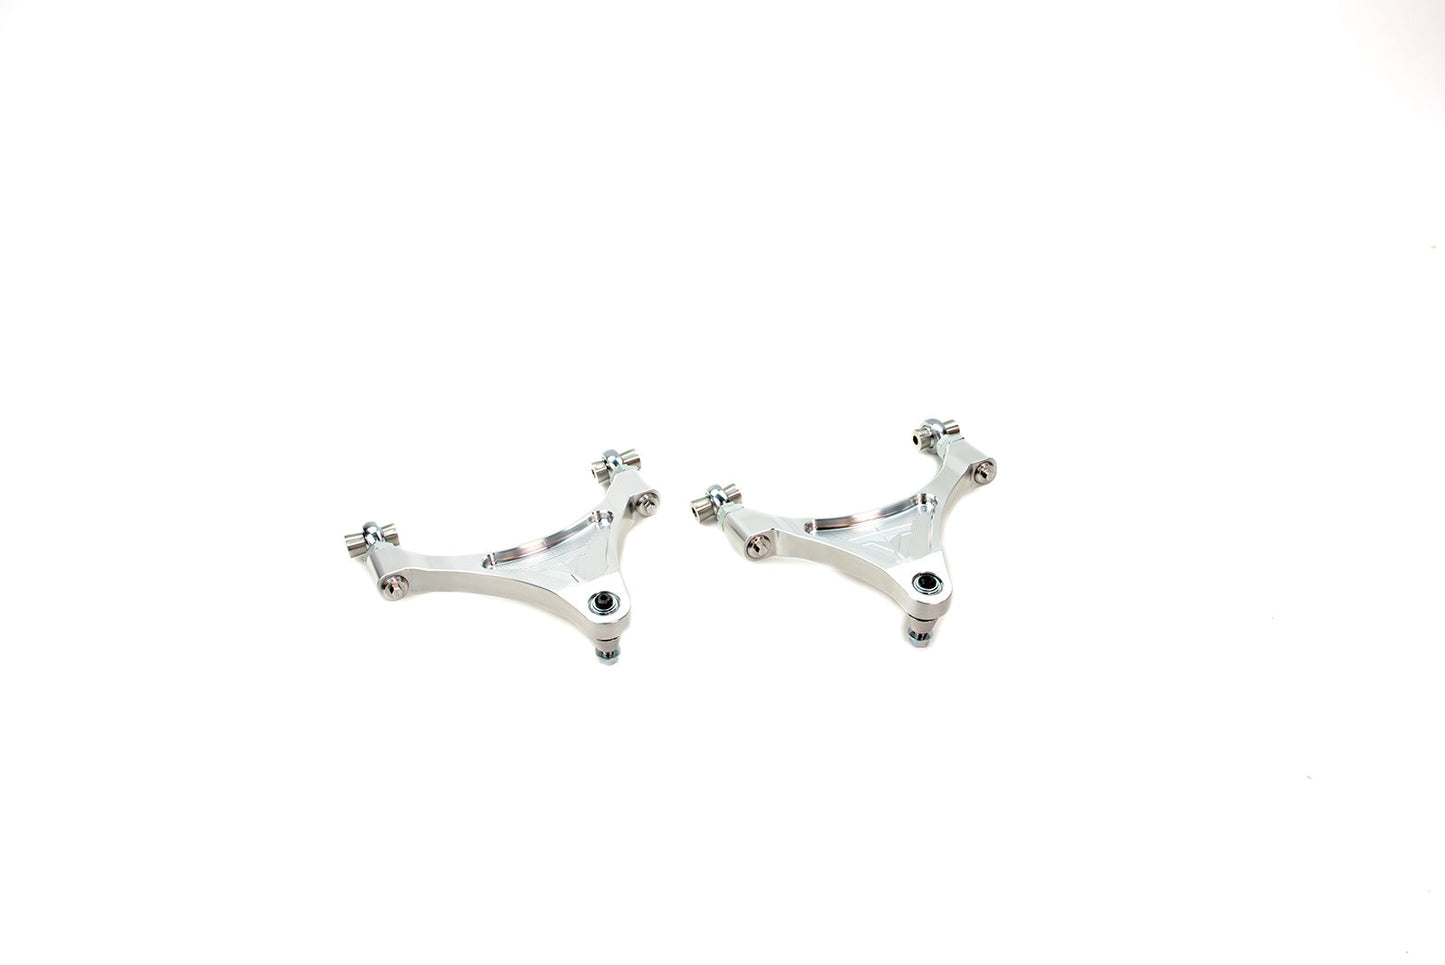 Voodoo13 - 350z/G35 Front Upper Camber/Caster Arms (FCNS-0300)